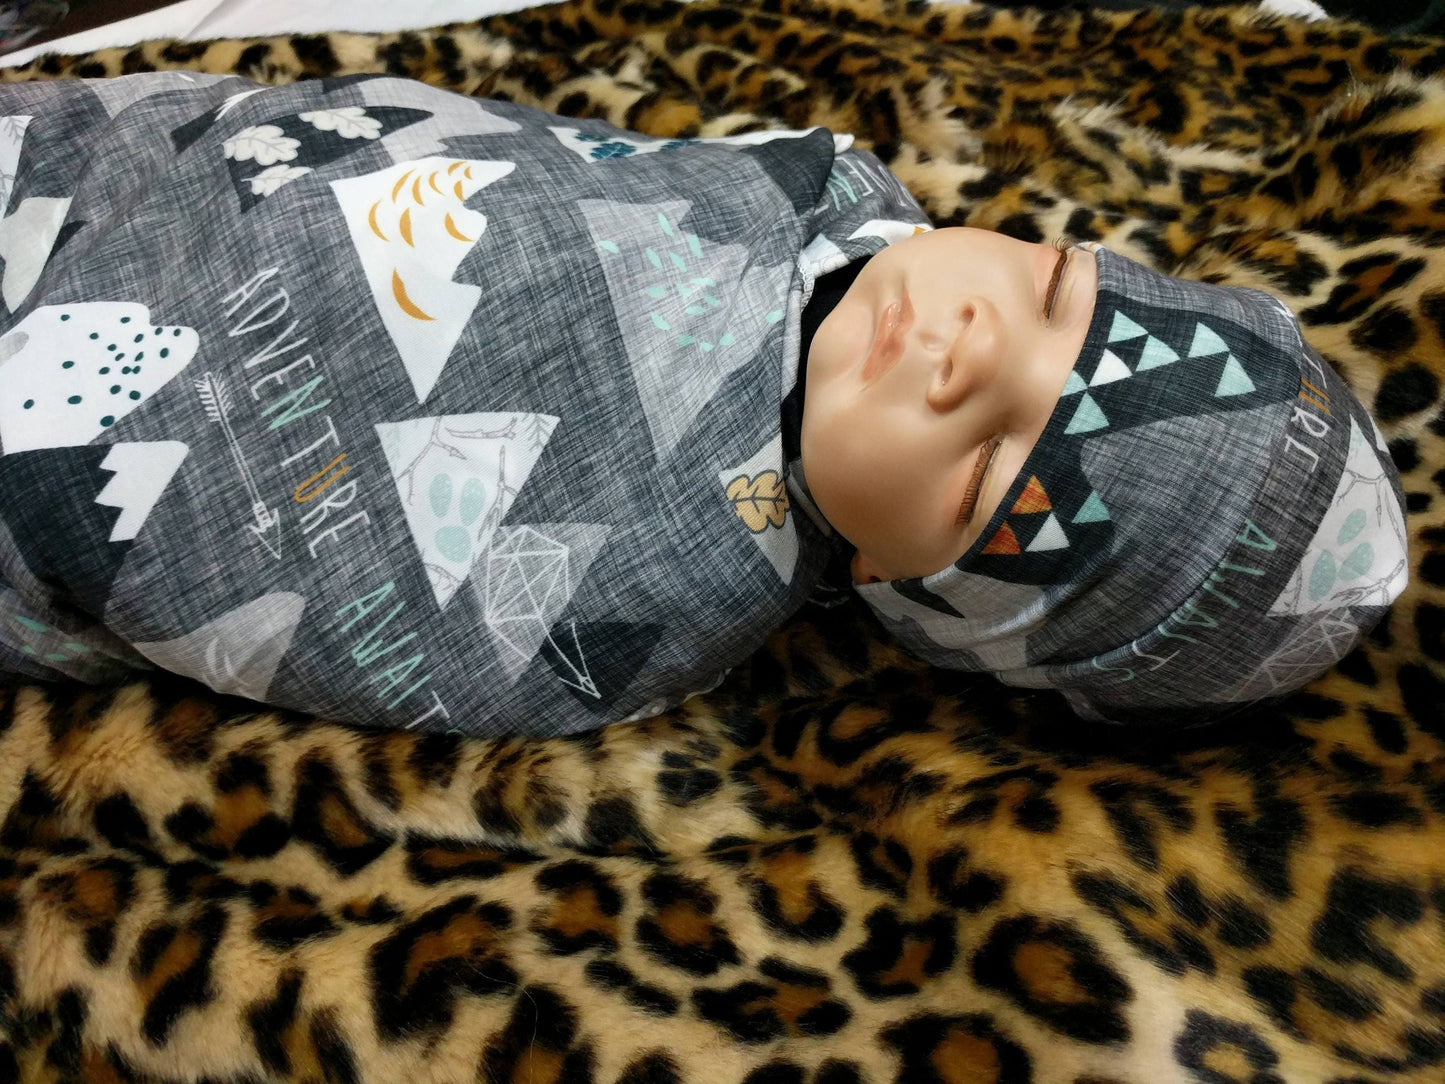 Adventure Awaits Mountain Baby Blanket + Matching Hat or Headband in Charcoal Gray,Outdoorsy,Whimsy